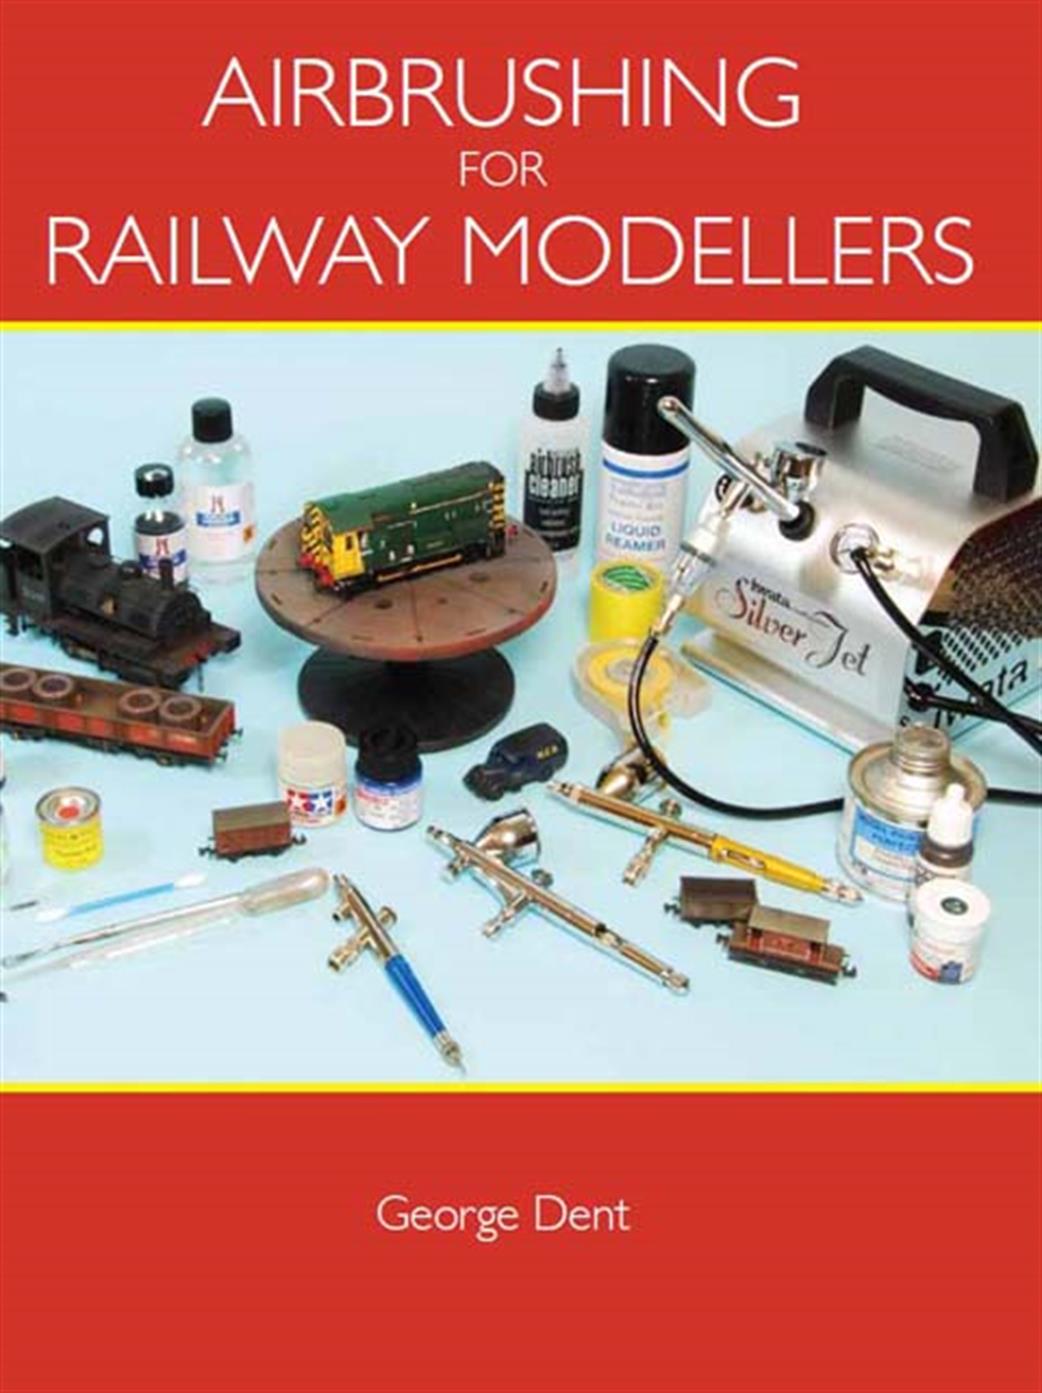 Crowood Press 978-1-84797-265-1 Airbrushing for Railway Modellers by George Dent